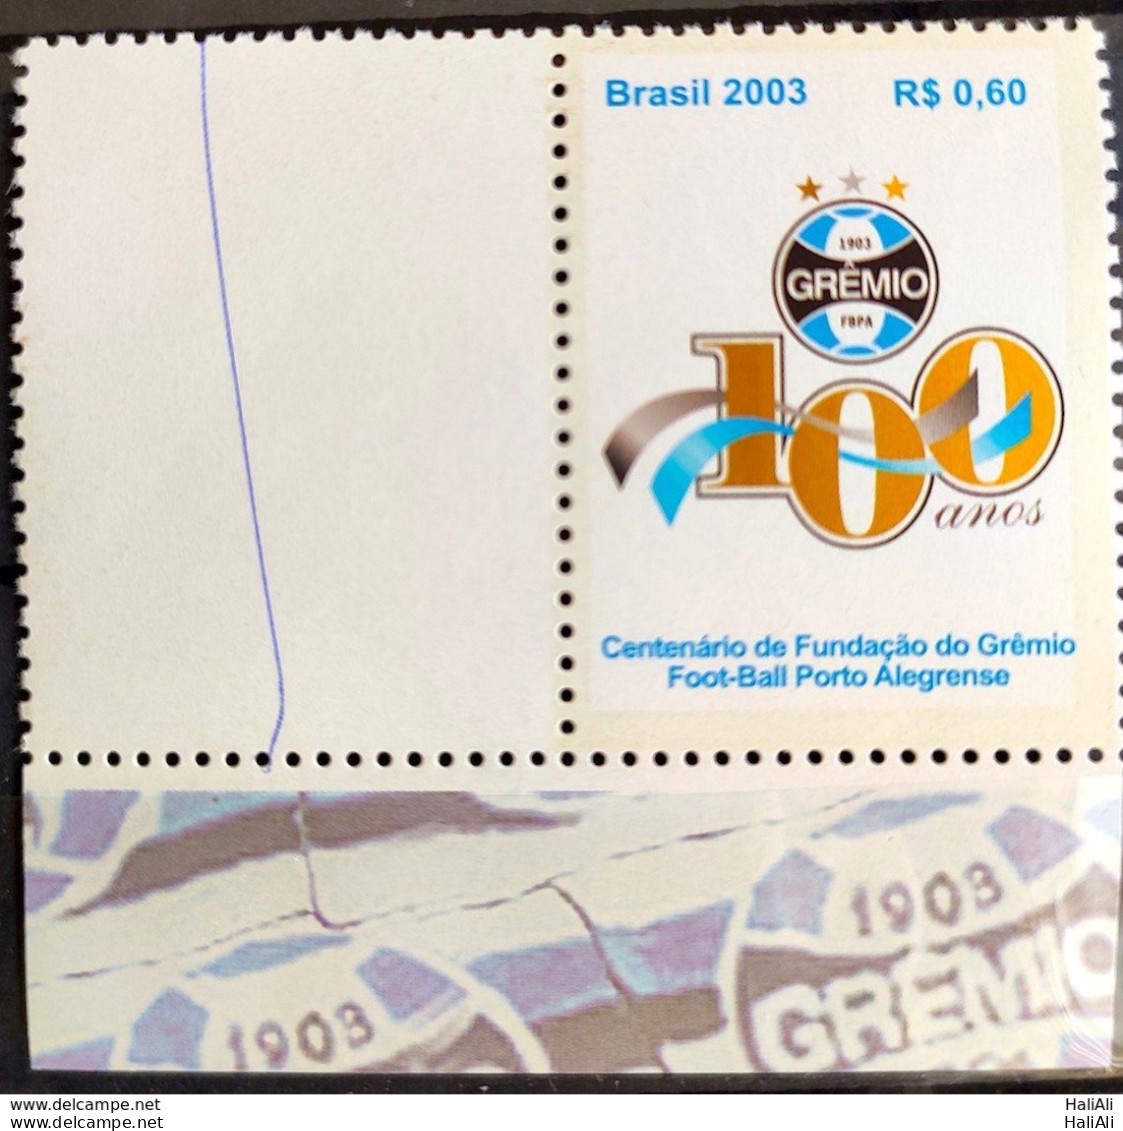 C 2542 Brazil Personalized Stamp Grêmio Football 2003 White Vignette Logo Right - Personalized Stamps